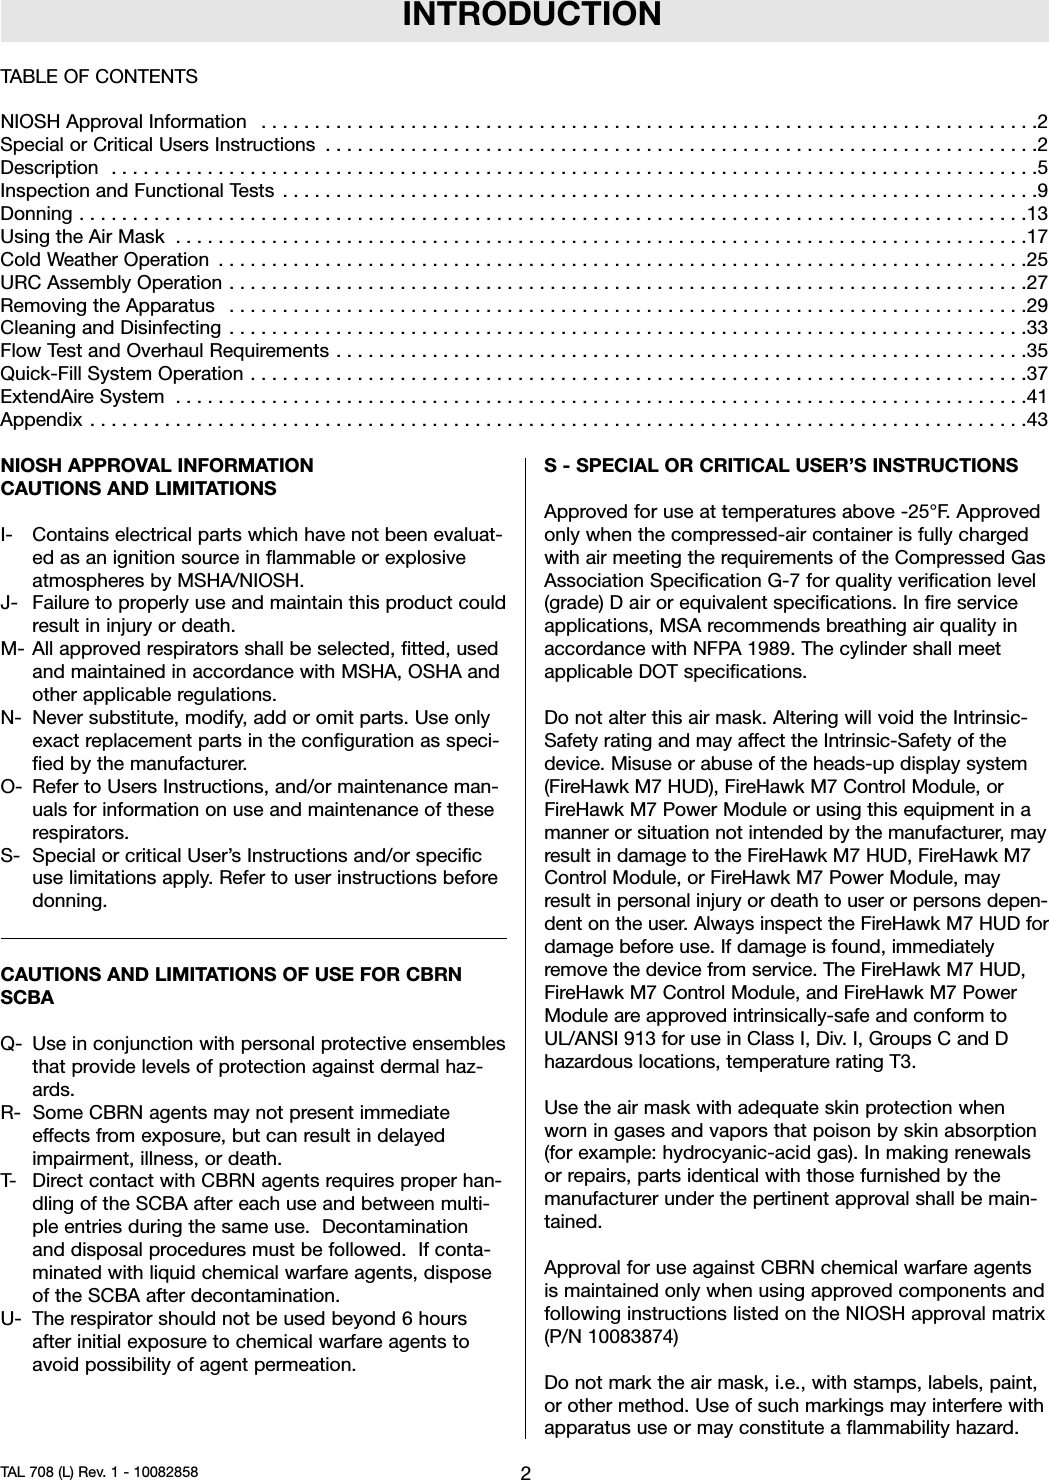 INTRODUCTIONNIOSH APPROVAL INFORMATIONCAUTIONS AND LIMITATIONSI- Contains electrical parts which have not been evaluat-ed as an ignition source in flammable or explosiveatmospheres by MSHA/NIOSH.J- Failure to properly use and maintain this product couldresult in injury or death.M- All approved respirators shall be selected, fitted, usedand maintained in accordance with MSHA, OSHA andother applicable regulations.N- Never substitute, modify, add or omit parts. Use onlyexact replacement parts in the configuration as speci-fied by the manufacturer.O- Refer to Users Instructions, and/or maintenance man-uals for information on use and maintenance of theserespirators.S- Special or critical User’s Instructions and/or specificuse limitations apply. Refer to user instructions beforedonning.CAUTIONS AND LIMITATIONS OF USE FOR CBRNSCBAQ- Use in conjunction with personal protective ensemblesthat provide levels of protection against dermal haz-ards.R- Some CBRN agents may not present immediateeffects from exposure, but can result in delayedimpairment, illness, or death.T- Direct contact with CBRN agents requires proper han-dling of the SCBA after each use and between multi-ple entries during the same use. Decontaminationand disposal procedures must be followed. If conta-minated with liquid chemical warfare agents, disposeof the SCBA after decontamination.U- The respirator should not be used beyond 6 hoursafter initial exposure to chemical warfare agents toavoid possibility of agent permeation.S - SPECIAL OR CRITICAL USER’S INSTRUCTIONSApproved for use at temperatures above -25°F. Approvedonly when the compressed-air container is fully chargedwith air meeting the requirements of the Compressed GasAssociation Specification G-7 for quality verification level(grade) D air or equivalent specifications. In fire serviceapplications, MSA recommends breathing air quality inaccordance with NFPA 1989. The cylinder shall meetapplicable DOT specifications.Do not alter this air mask. Altering will void the Intrinsic-Safety rating and may affect the Intrinsic-Safety of thedevice. Misuse or abuse of the heads-up display system(FireHawk M7 HUD), FireHawk M7 Control Module, orFireHawk M7 Power Module or using this equipment in amanner or situation not intended by the manufacturer, mayresult in damage to the FireHawk M7 HUD, FireHawk M7Control Module, or FireHawk M7 Power Module, mayresult in personal injury or death to user or persons depen-dent on the user. Always inspect the FireHawk M7 HUD fordamage before use. If damage is found, immediatelyremove the device from service. The FireHawk M7 HUD,FireHawk M7 Control Module, and FireHawk M7 PowerModule are approved intrinsically-safe and conform toUL/ANSI 913 for use in Class I, Div. I, Groups C and Dhazardous locations, temperature rating T3.Use the air mask with adequate skin protection whenworn in gases and vapors that poison by skin absorption(for example: hydrocyanic-acid gas). In making renewalsor repairs, parts identical with those furnished by themanufacturer under the pertinent approval shall be main-tained.Approval for use against CBRN chemical warfare agentsis maintained only when using approved components andfollowing instructions listed on the NIOSH approval matrix(P/N 10083874)Do not mark the air mask, i.e., with stamps, labels, paint,or other method. Use of such markings may interfere withapparatus use or may constitute a flammability hazard.2TAL 708 (L) Rev. 1 - 10082858TABLE OF CONTENTSNIOSHApprovalInformation .........................................................................2SpecialorCriticalUsersInstructions ...................................................................2Description .......................................................................................5InspectionandFunctionalTests .......................................................................9Donning.........................................................................................13UsingtheAirMask ................................................................................17ColdWeatherOperation ............................................................................25URCAssemblyOperation...........................................................................27RemovingtheApparatus ...........................................................................29CleaningandDisinfecting ...........................................................................33FlowTestandOverhaulRequirements.................................................................35Quick-FillSystemOperation.........................................................................37ExtendAireSystem ................................................................................41Appendix........................................................................................43